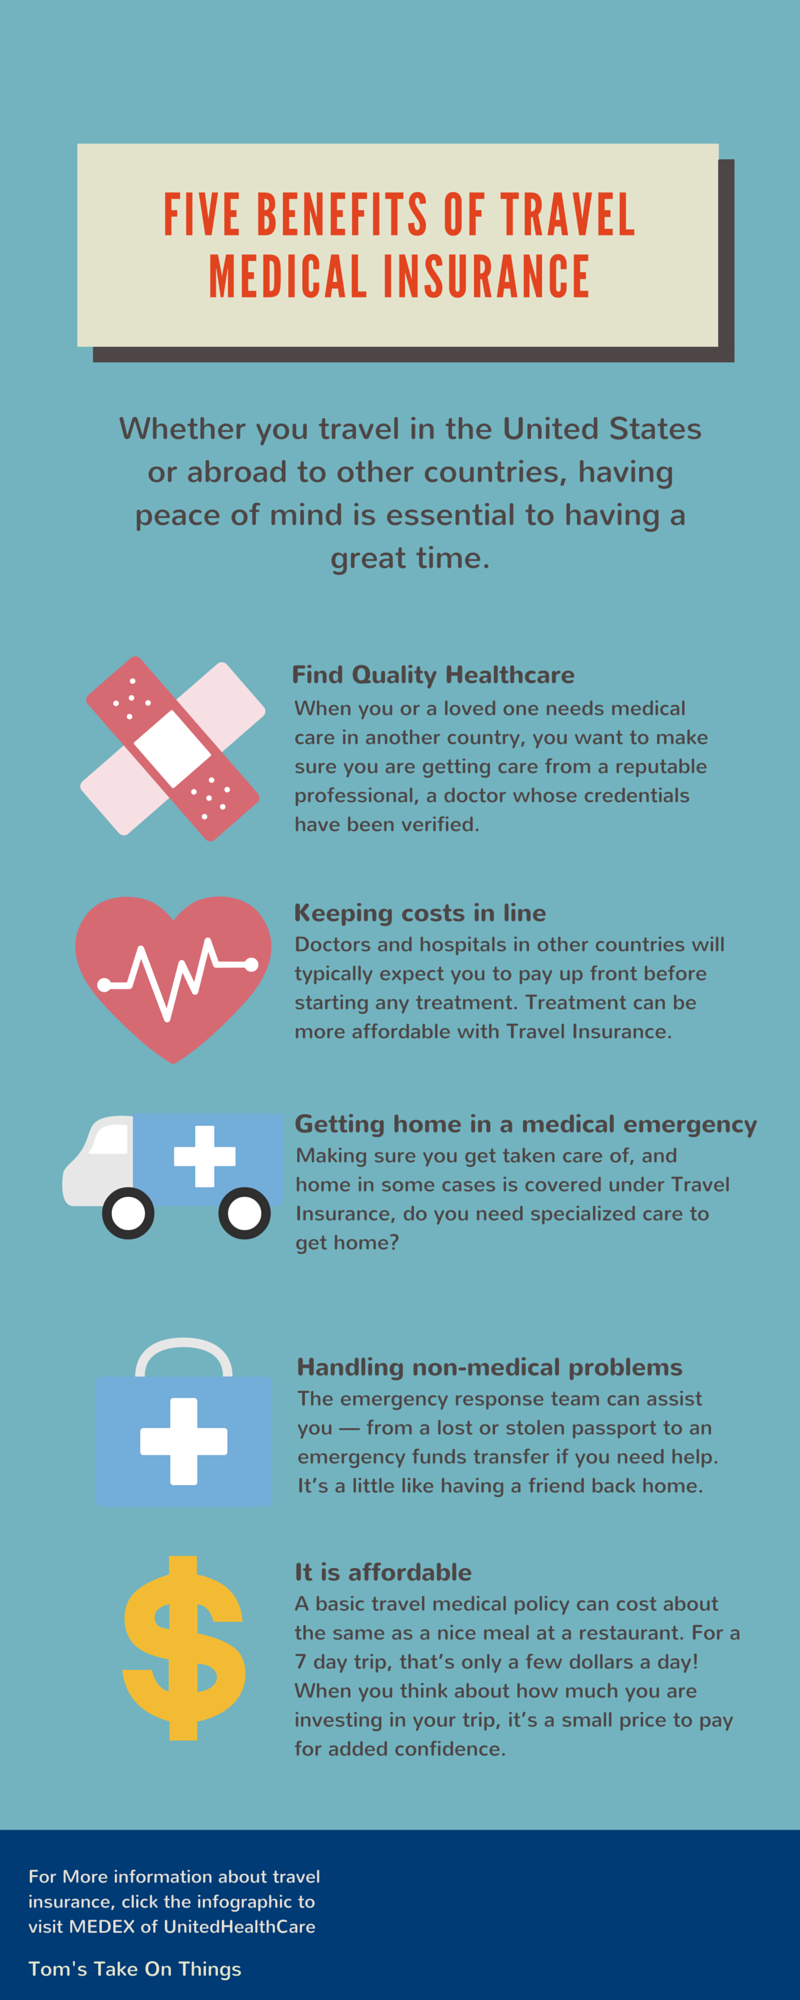 Five Benefits of Travel Medical Insurance